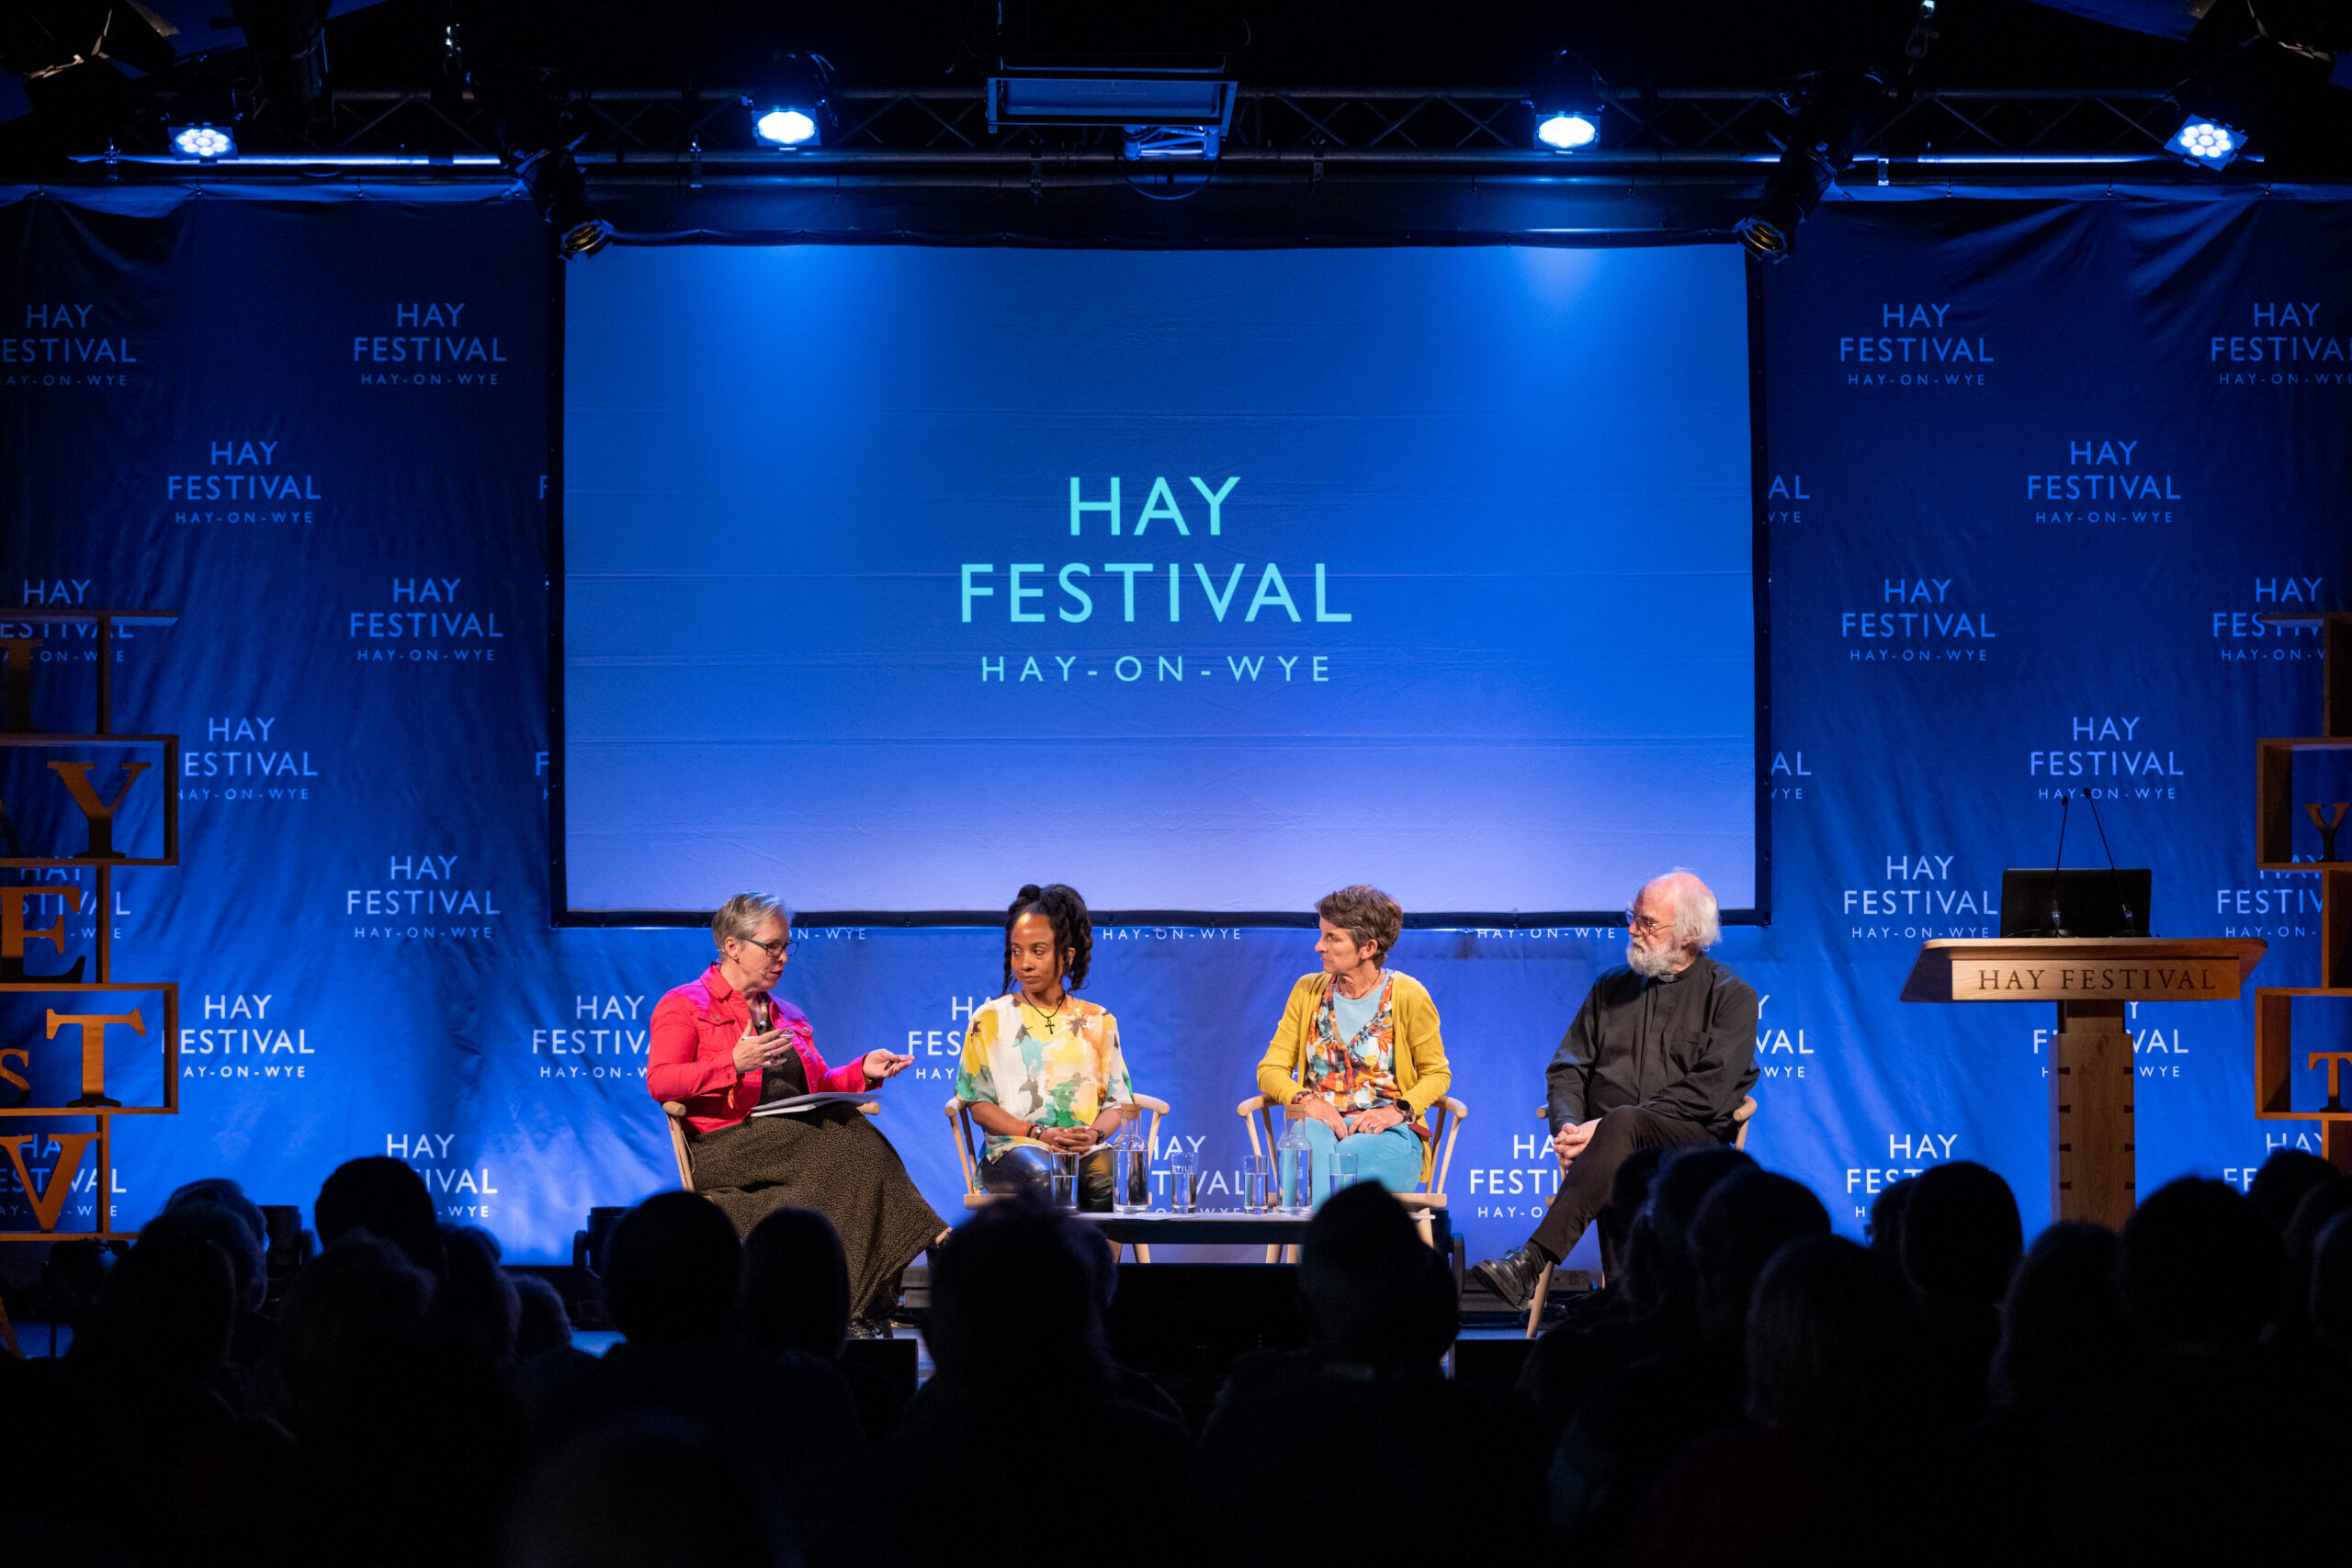 A picture of the members of the Constitutional Commission during an event chaired by IWA director Auriol Miller at Hay Festival.